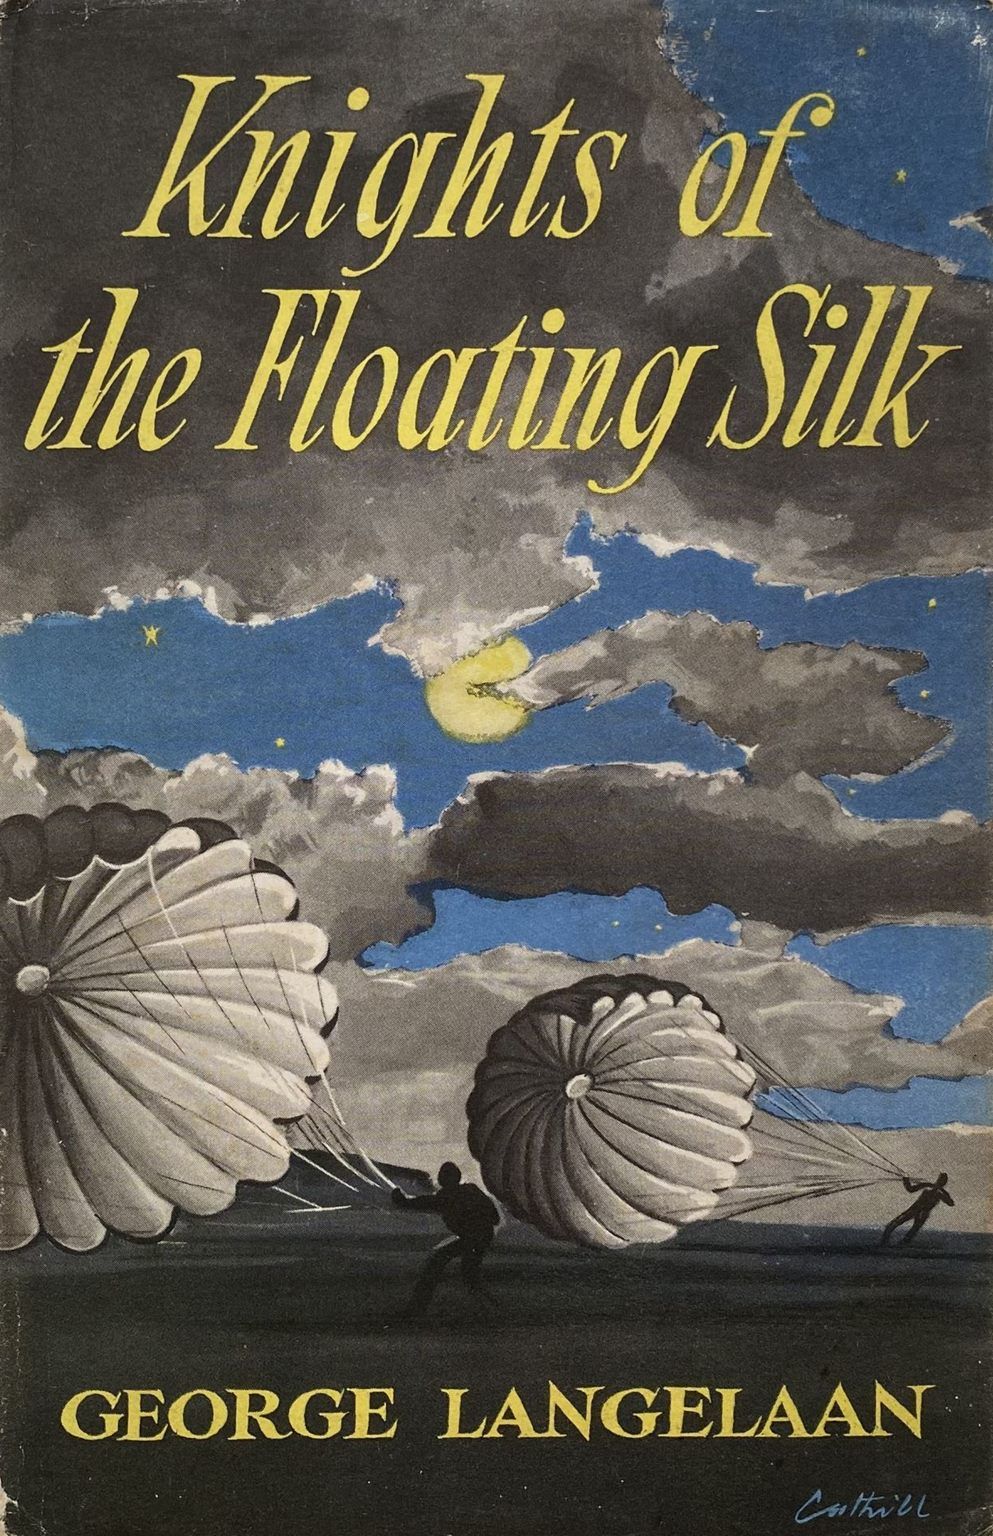 Knights of the Floating Silk